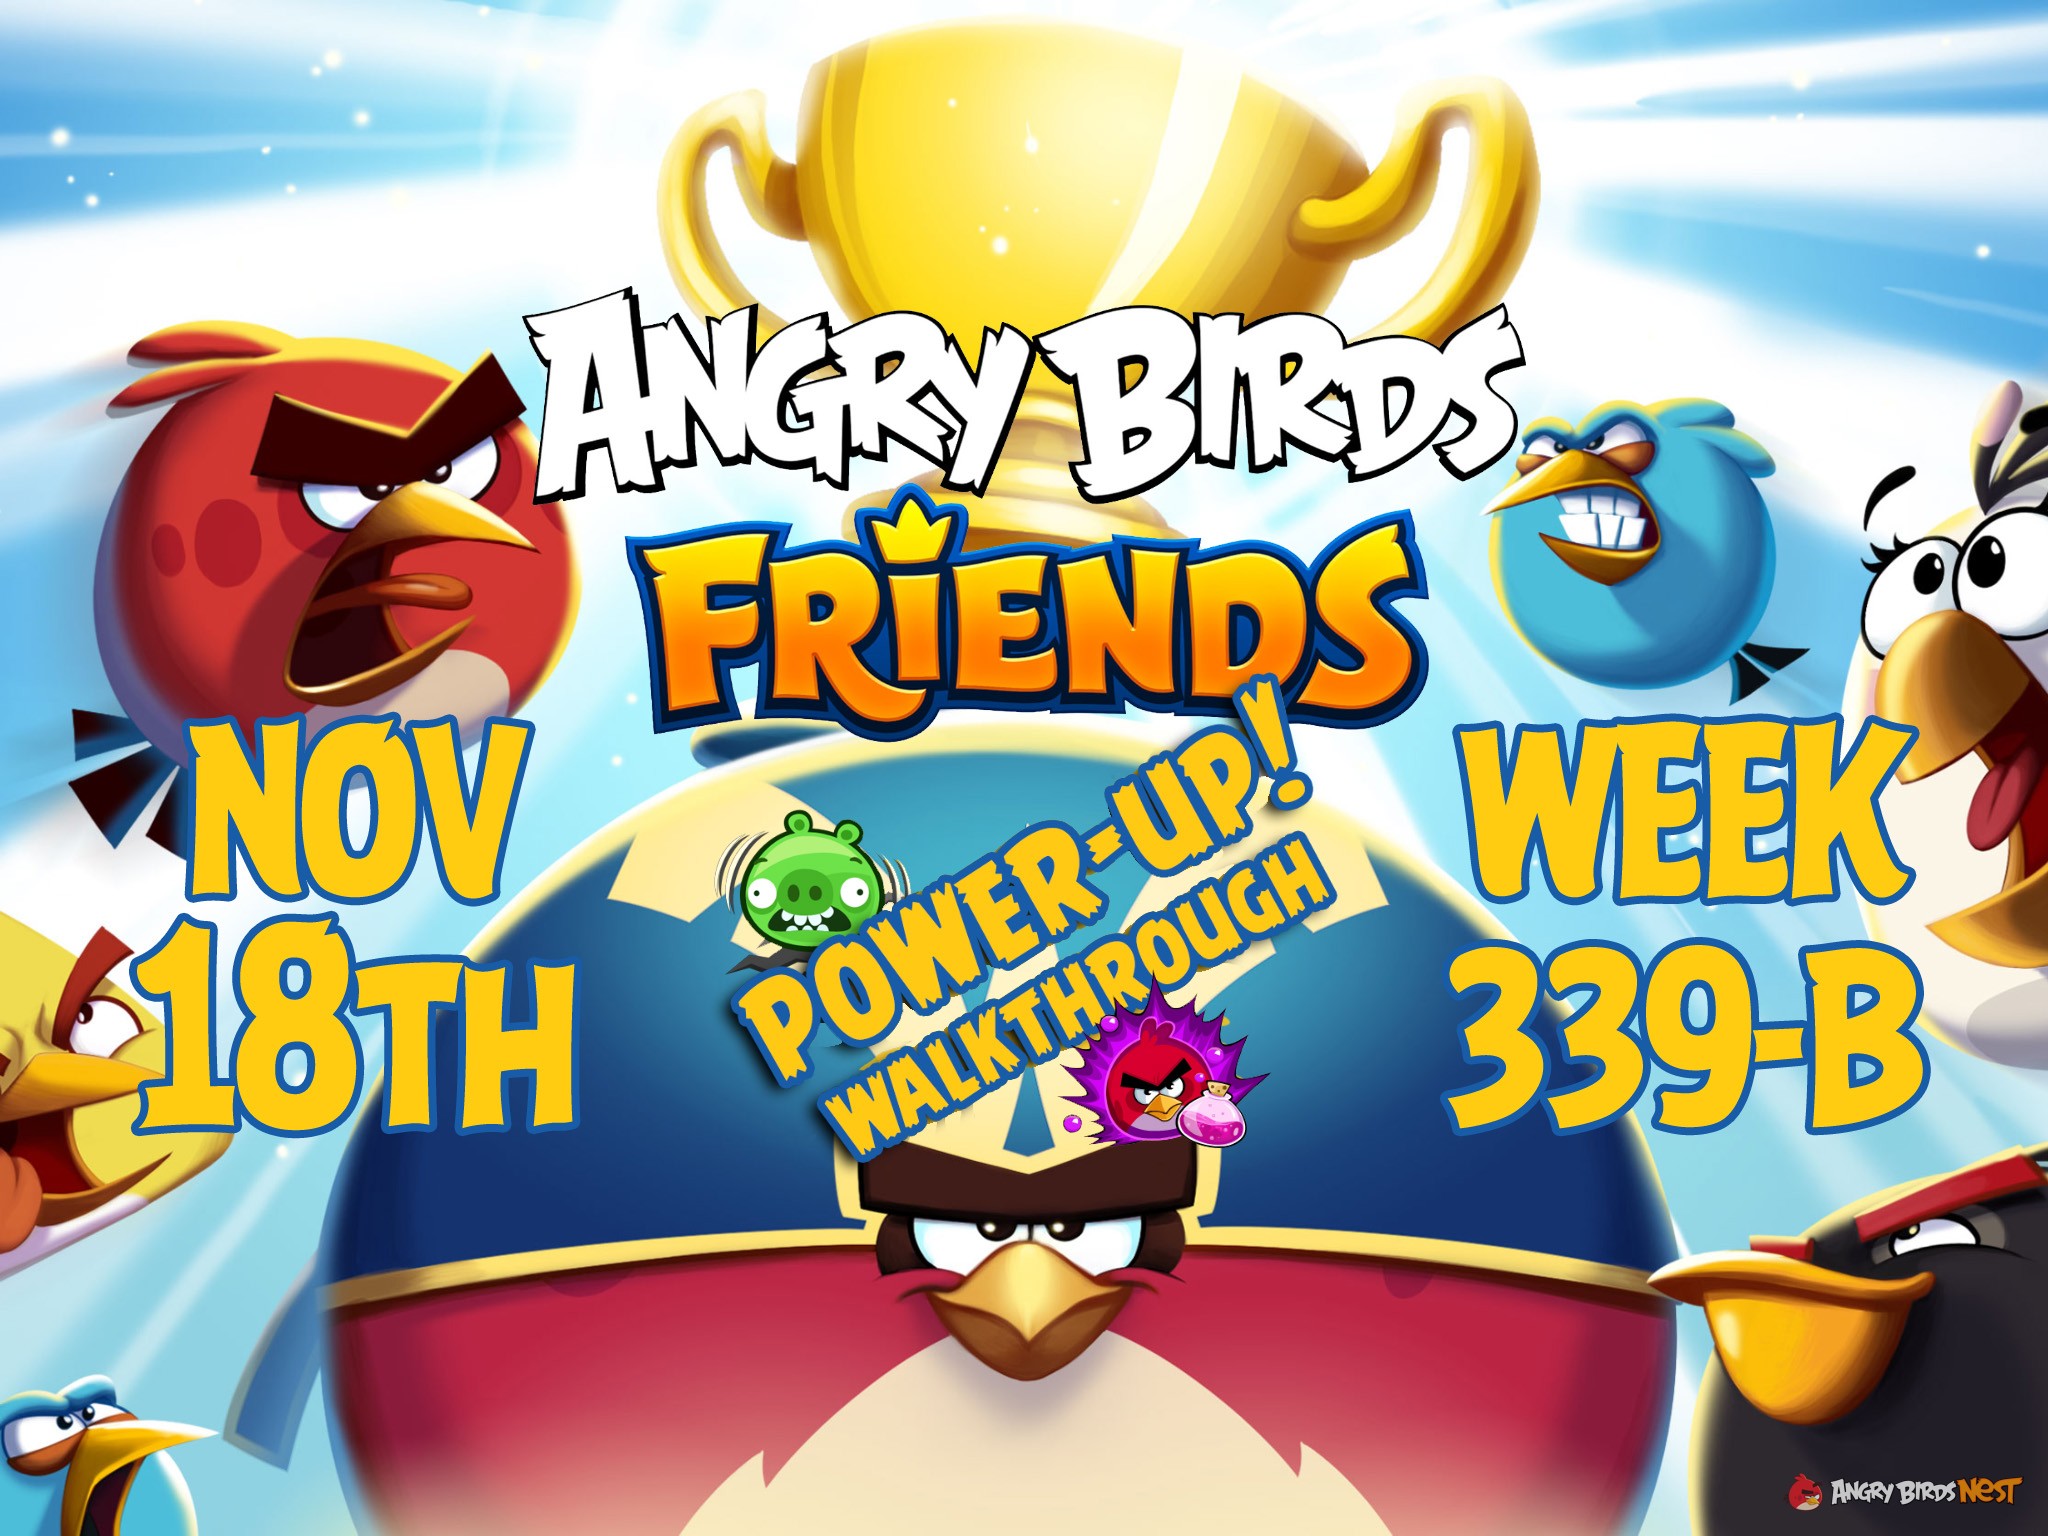 Angry-Birds-Friends-Tournament-Week-339-B-Feature-Image-PU